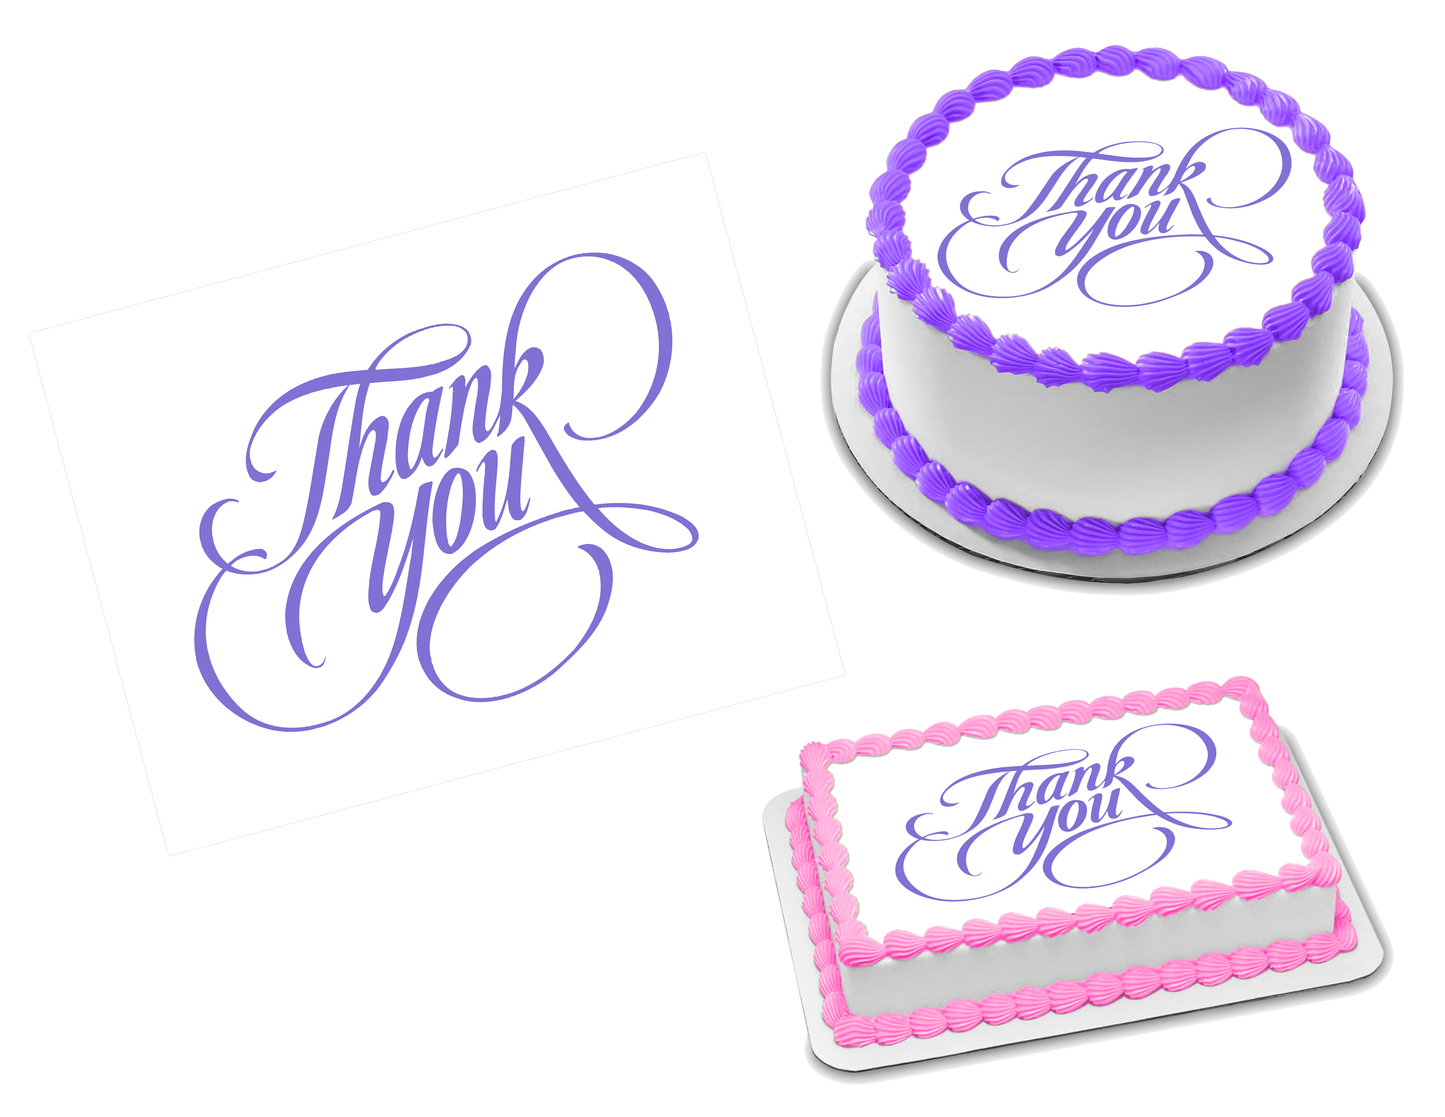 Thank You Calligraphy Light Purple Edible Image Frosting Sheet #10 (70+ sizes)